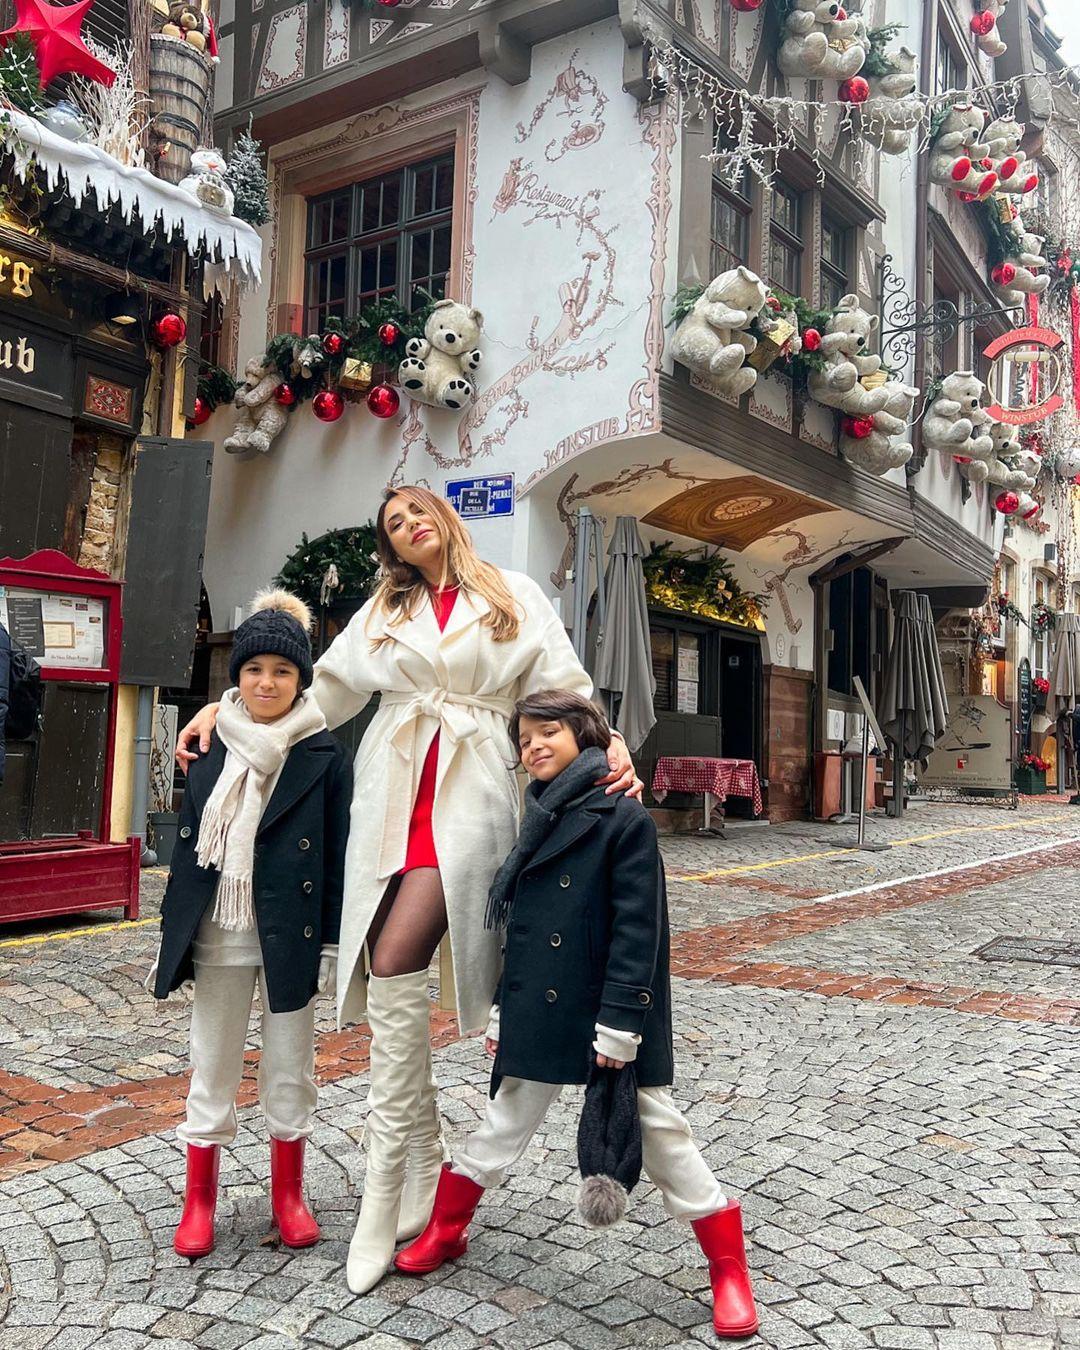 class="content__text"
 Hello from #Strasbourg 📍🐻❤️ Swipe left for the #PhotoDump Which one is your favorite ? 🤍 

 #Alsace #FamilyTime #Holidays #MomAndSons #Explore #Trend #December2022 #MamasBoys #TravelStyle 
 